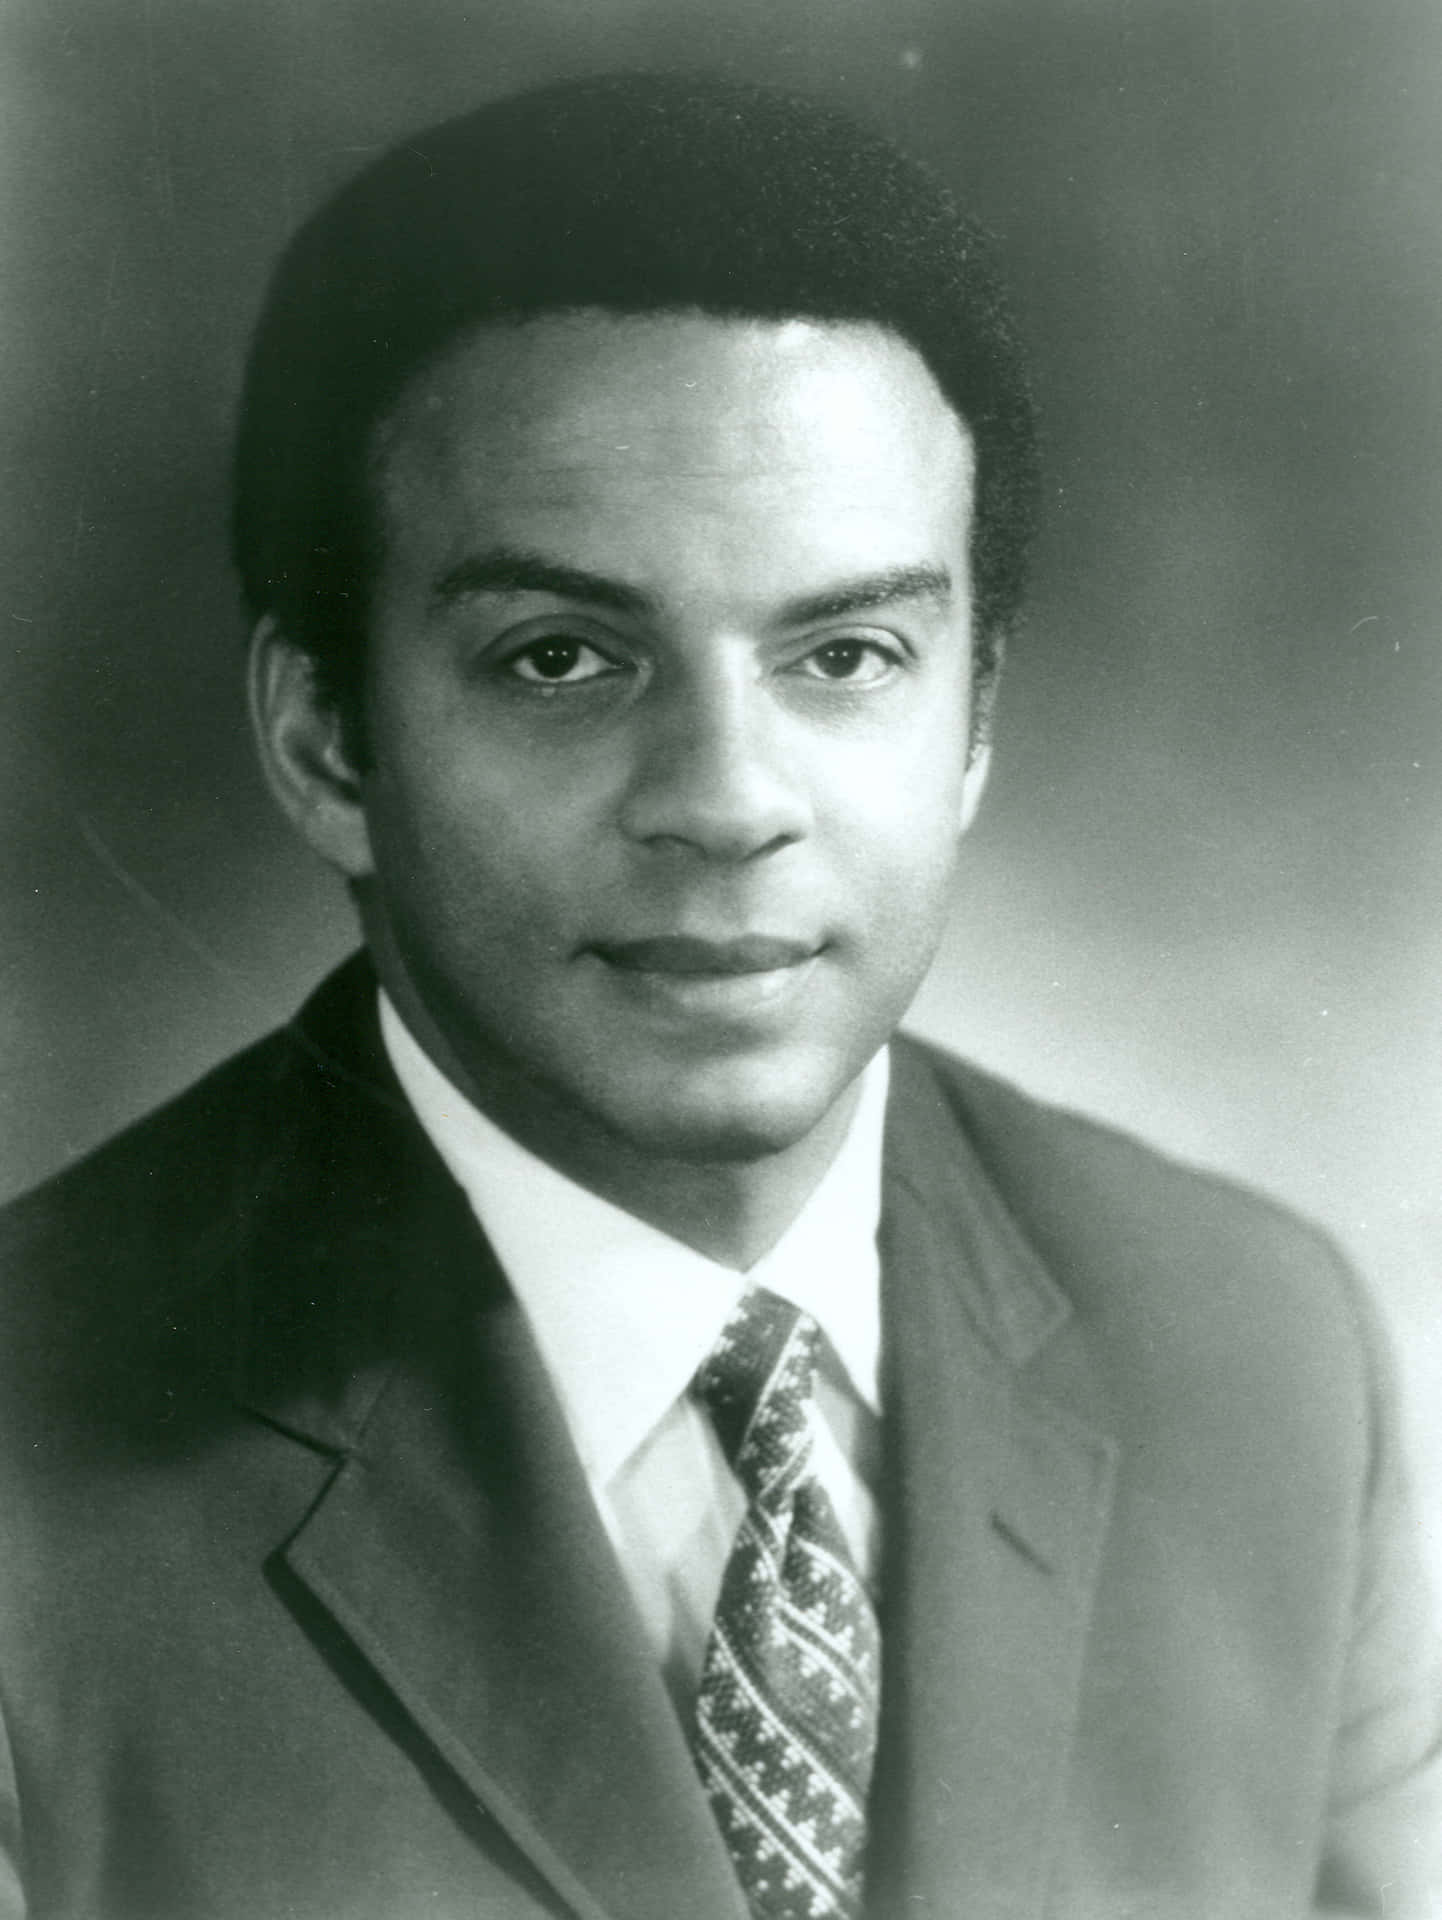 Distinguished Andrew Young in a Business Suit Wallpaper